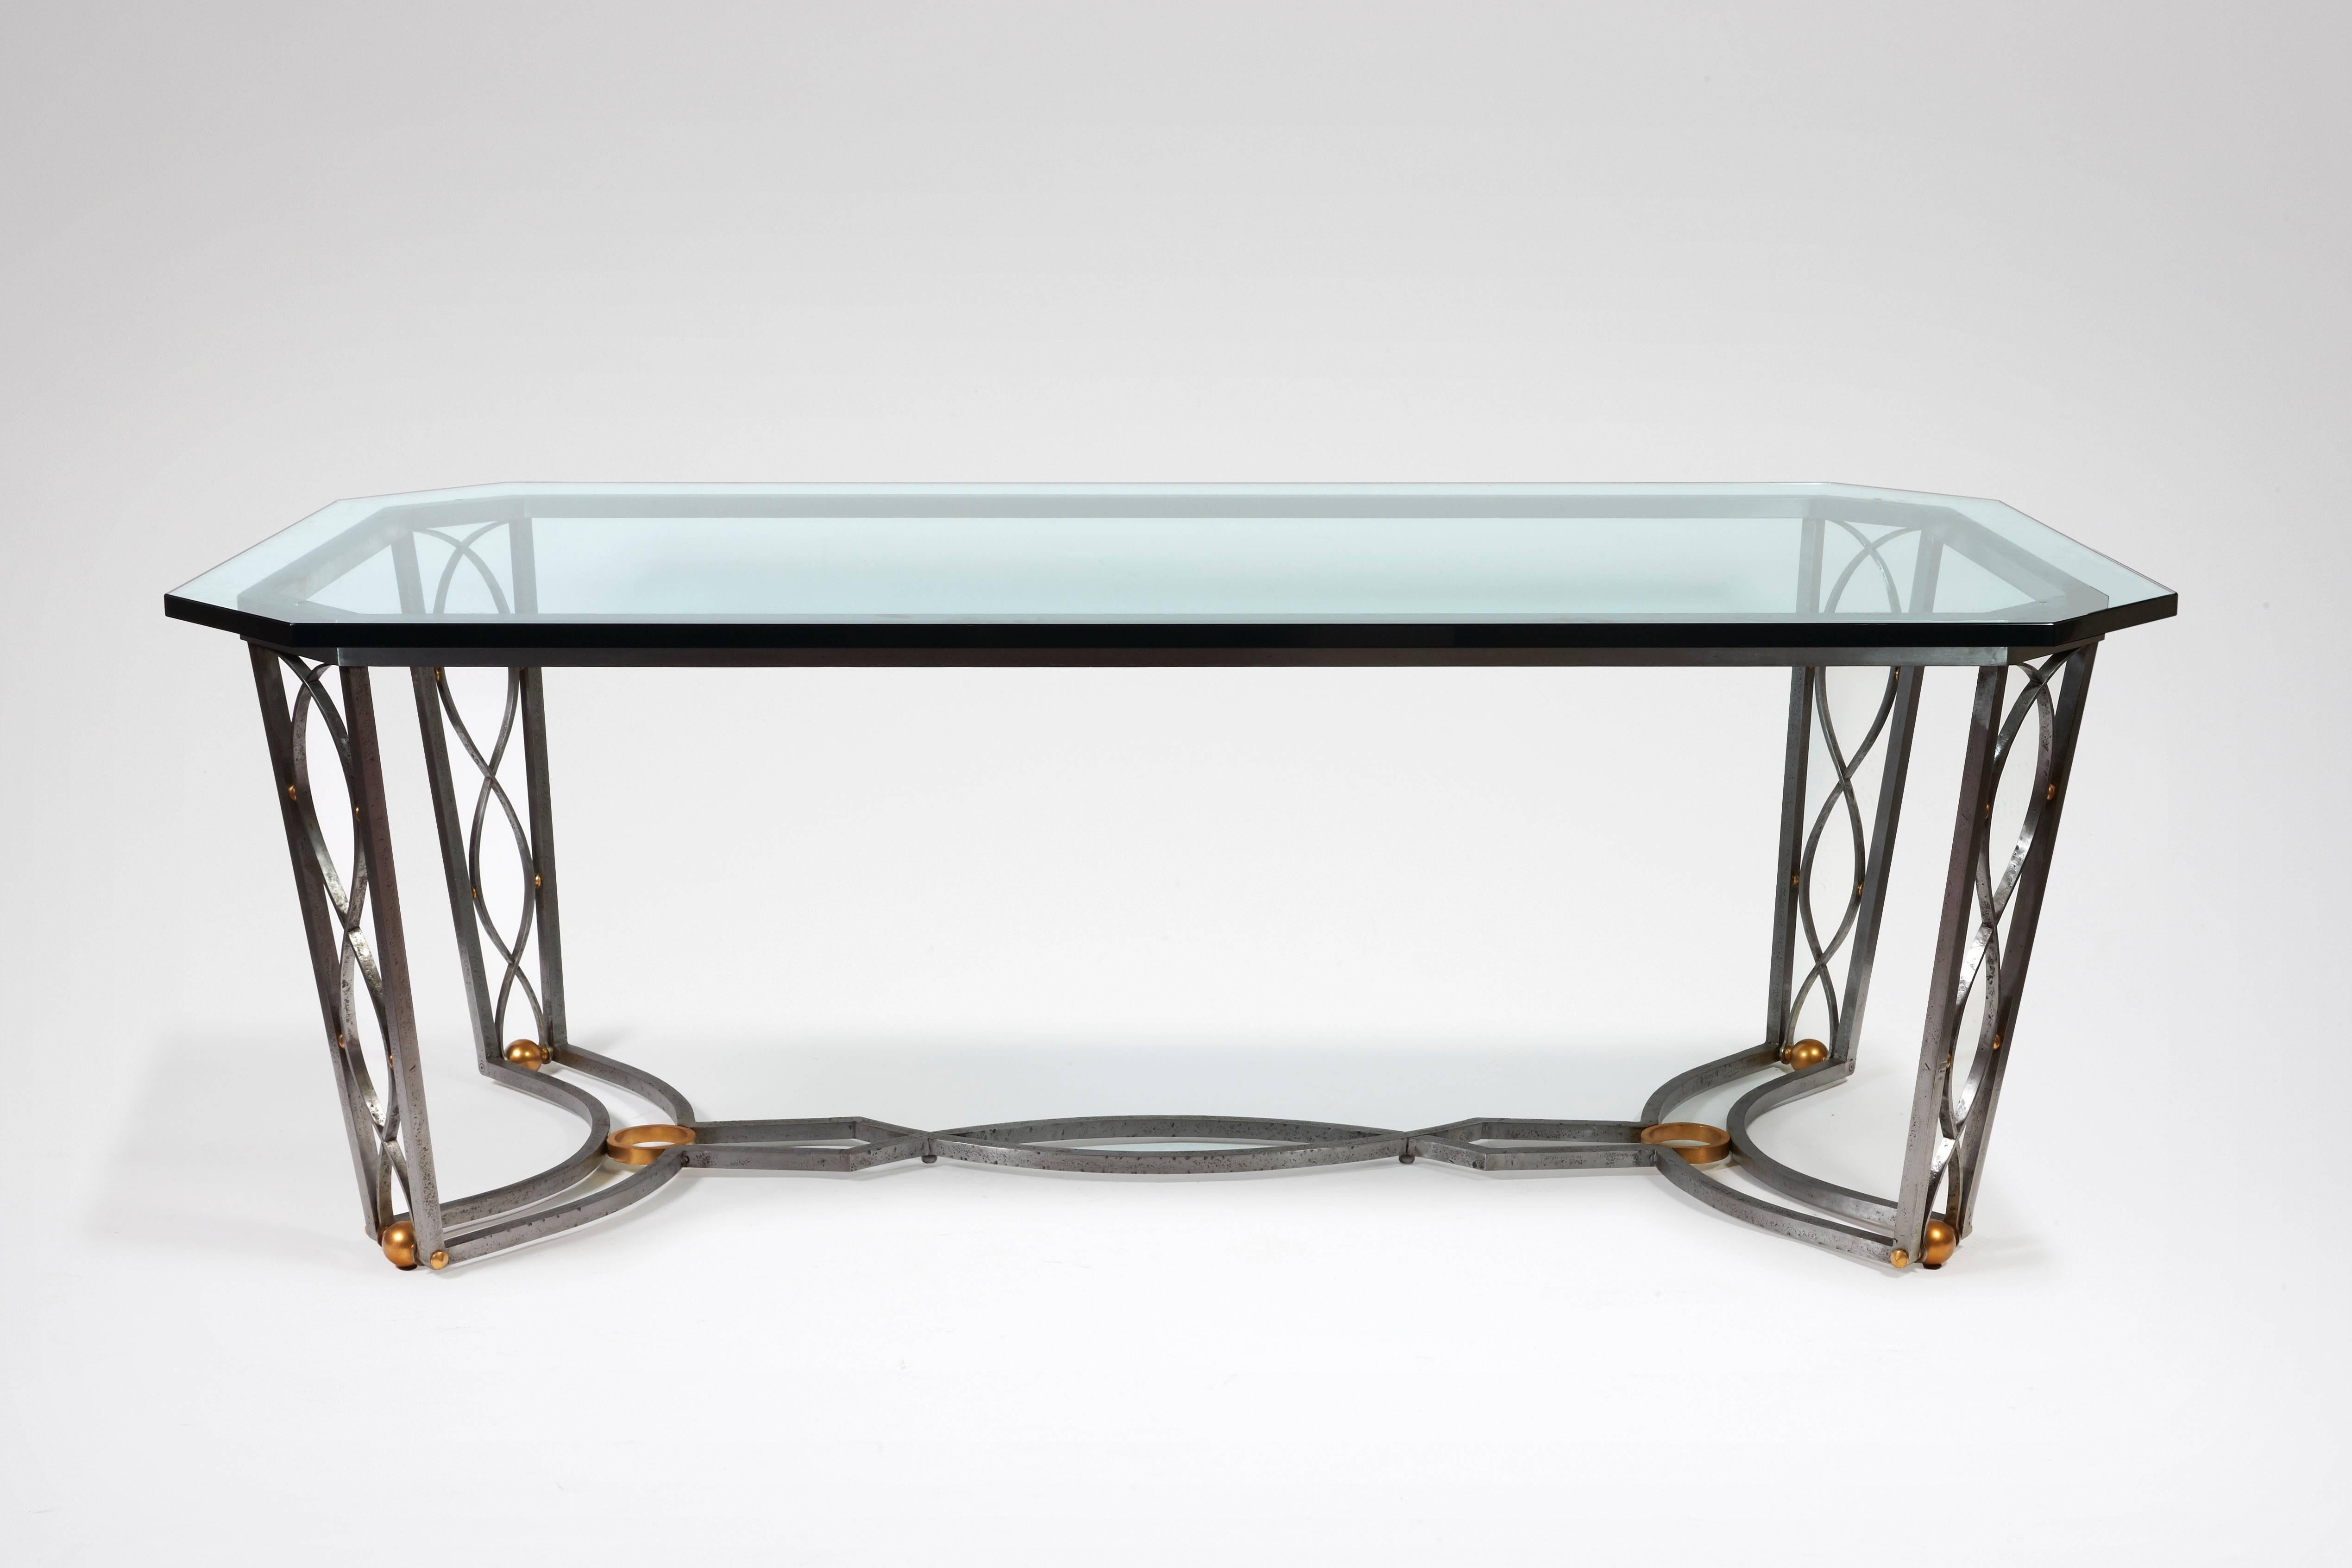 Dining room table in wrought iron and glass.

- Félix Marcilhac, 